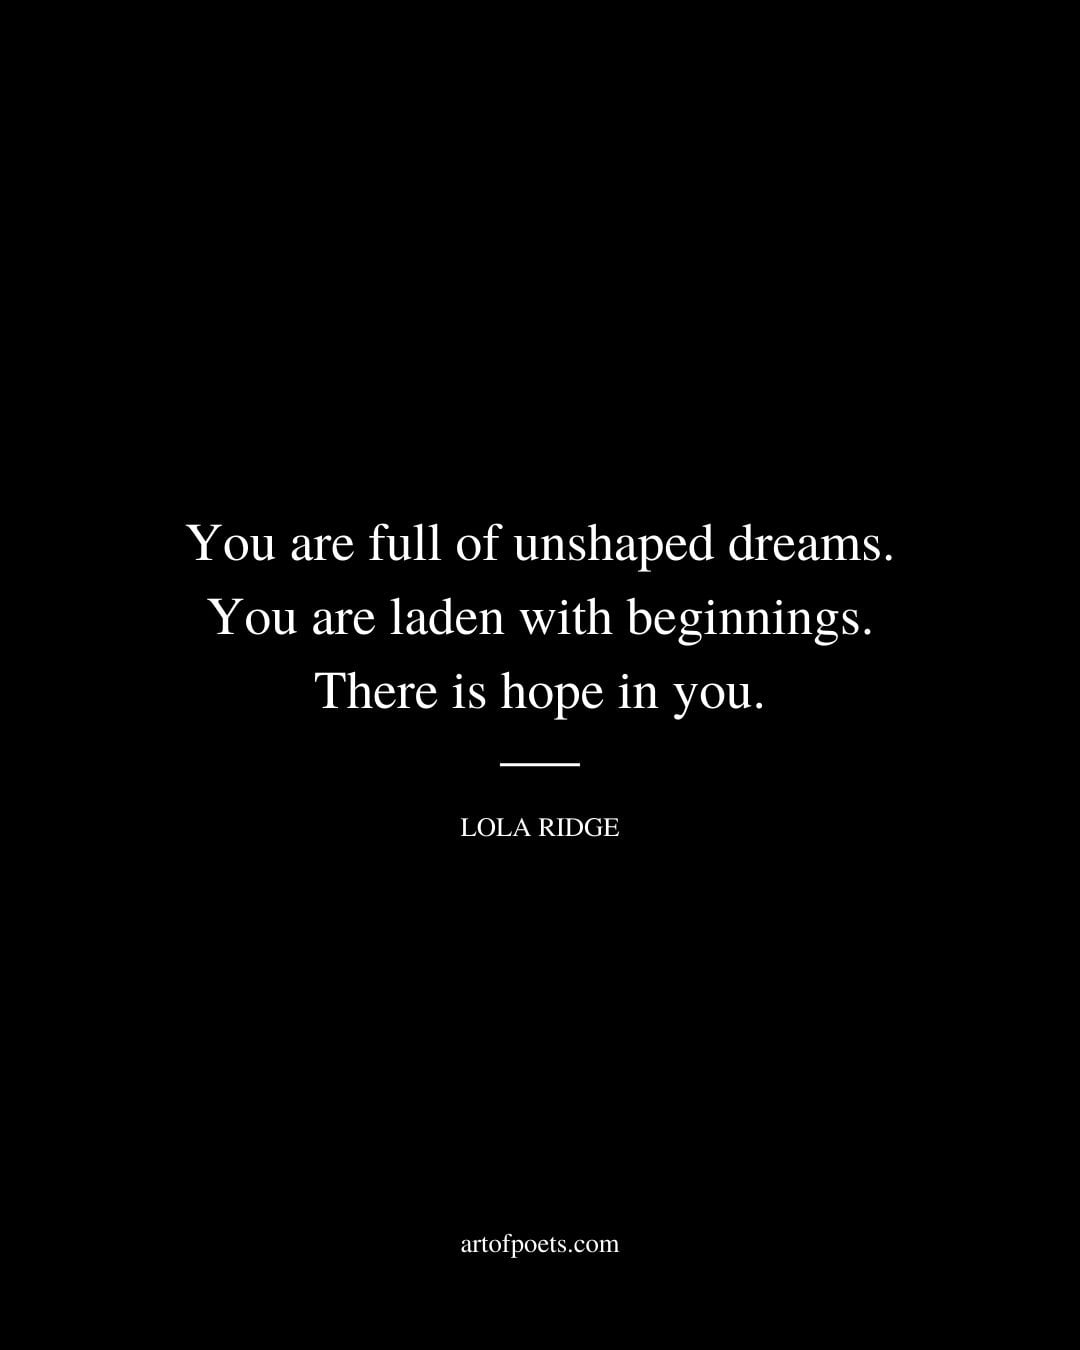 You are full of unshaped dreams… You are laden with beginnings… There is hope in you… Lola Ridge